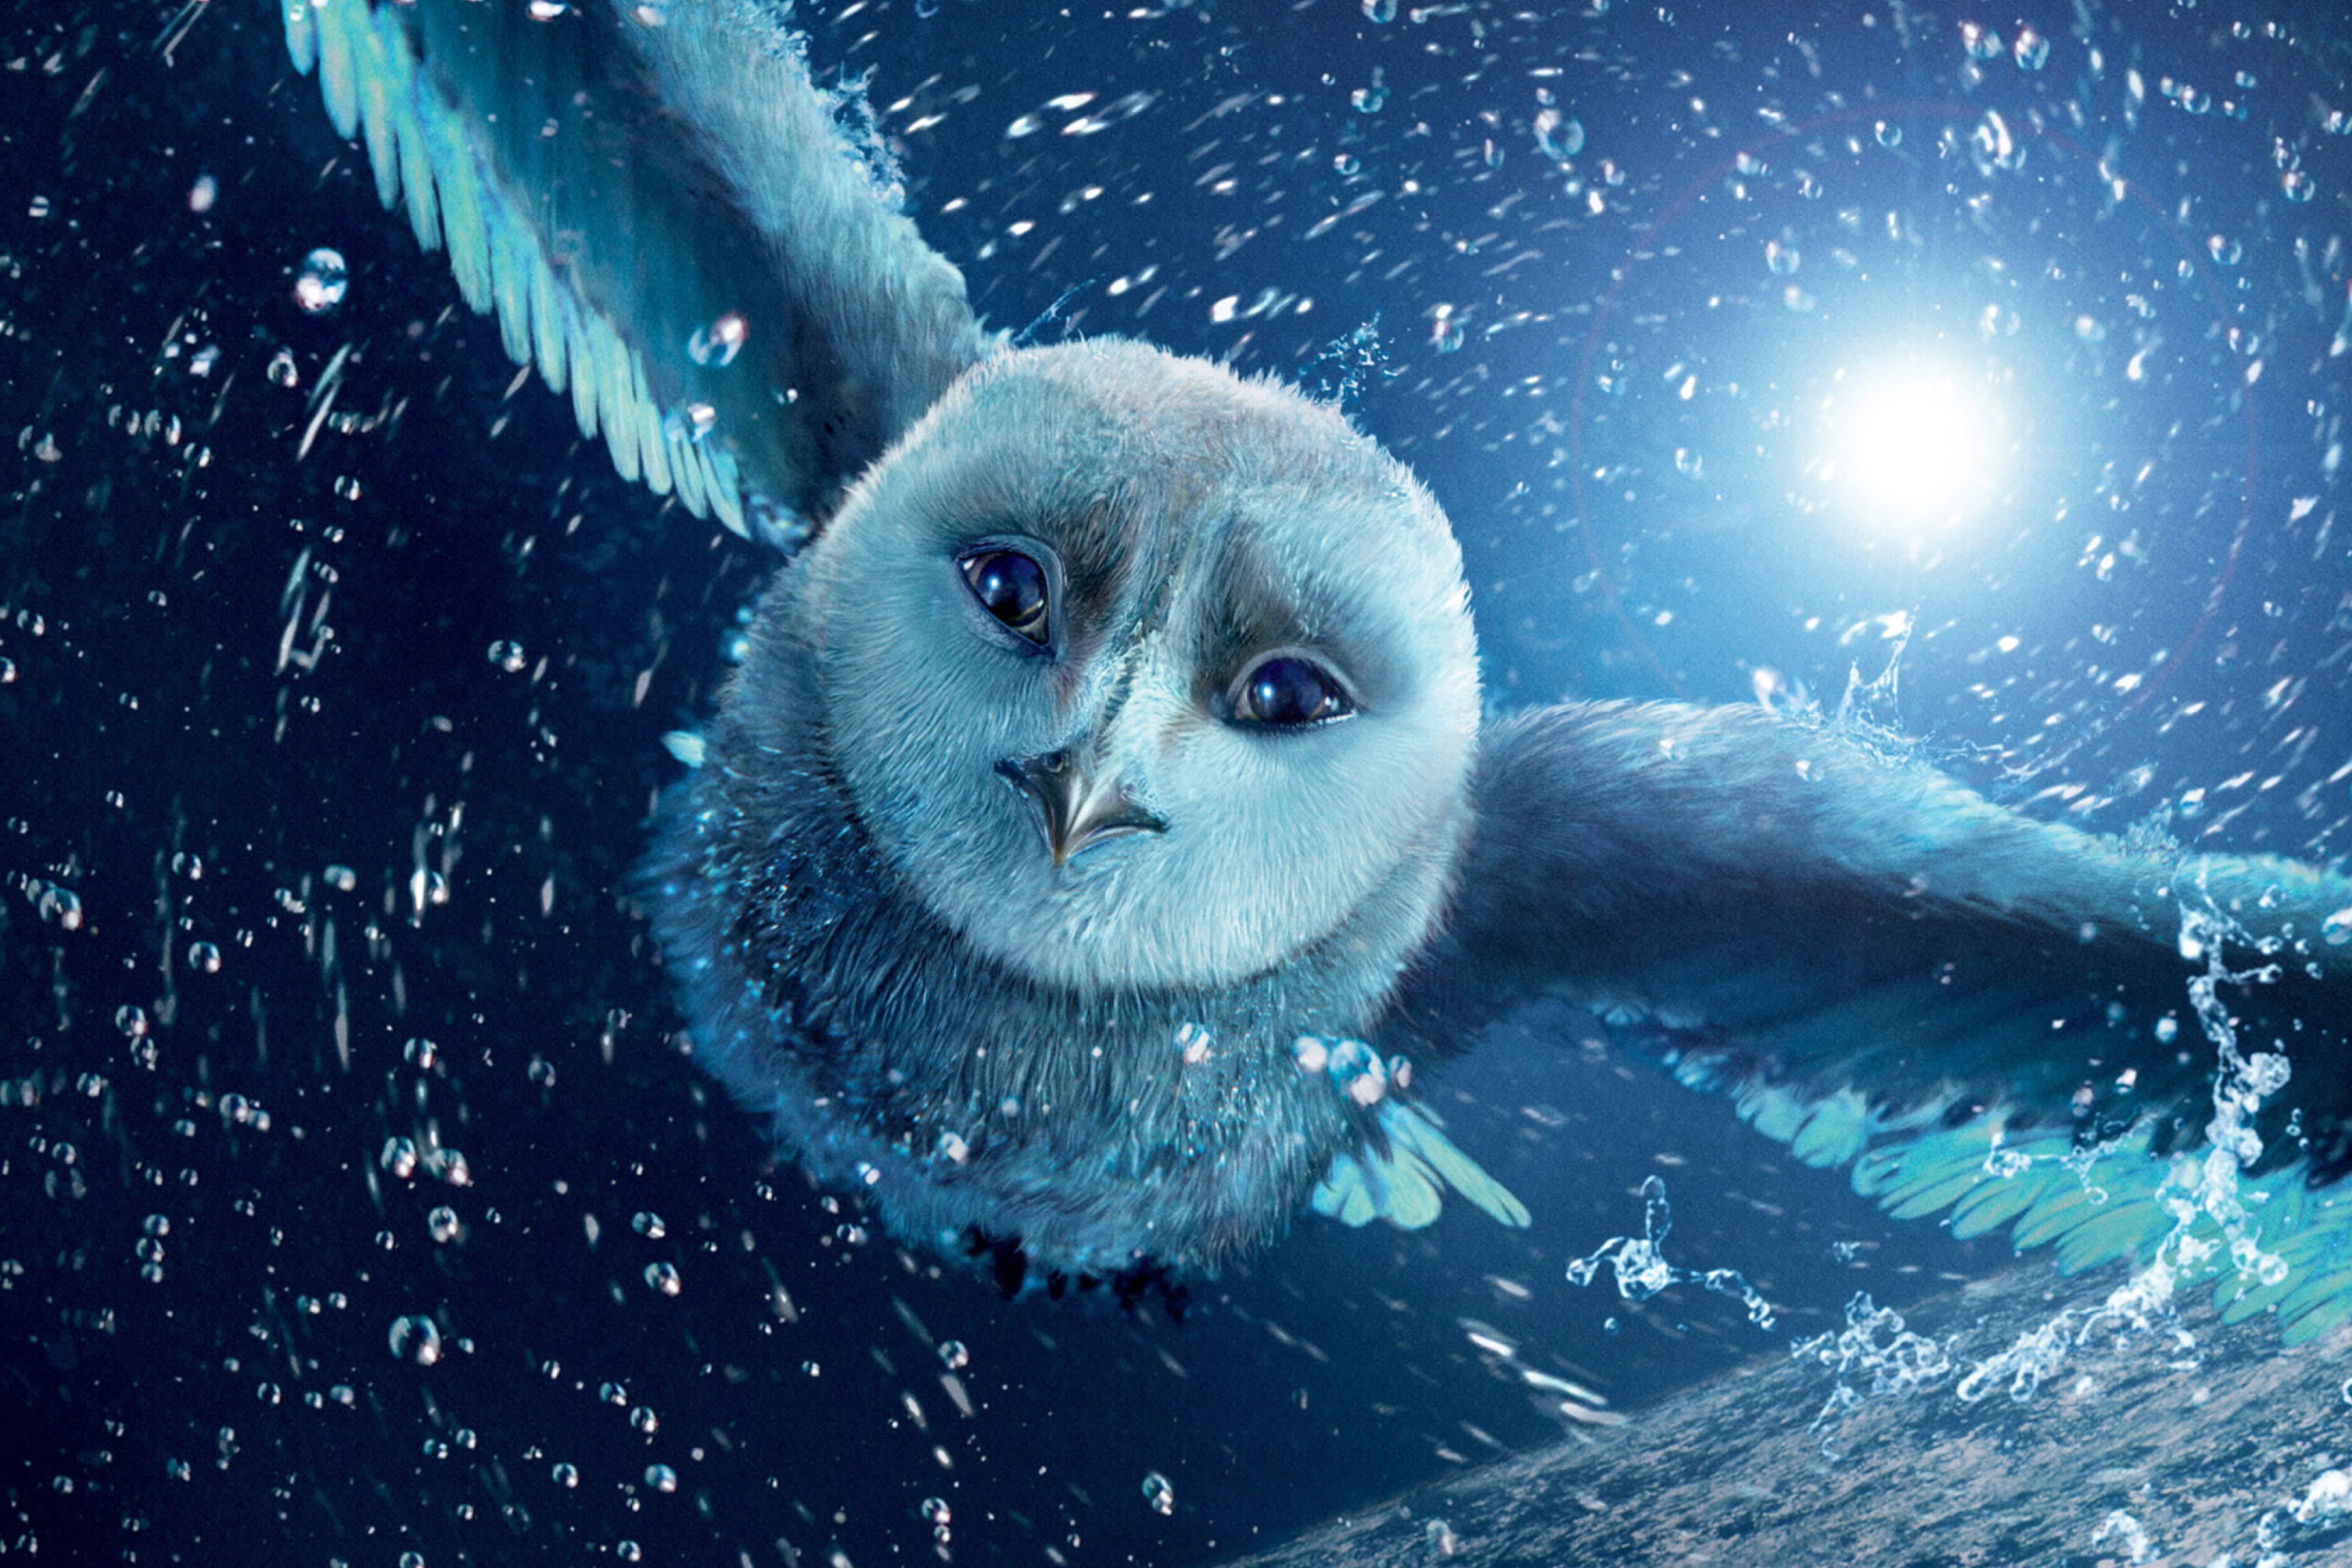 Legend Of The Guardians The Owls Of Ga Hoole wallpaper 2880x1920